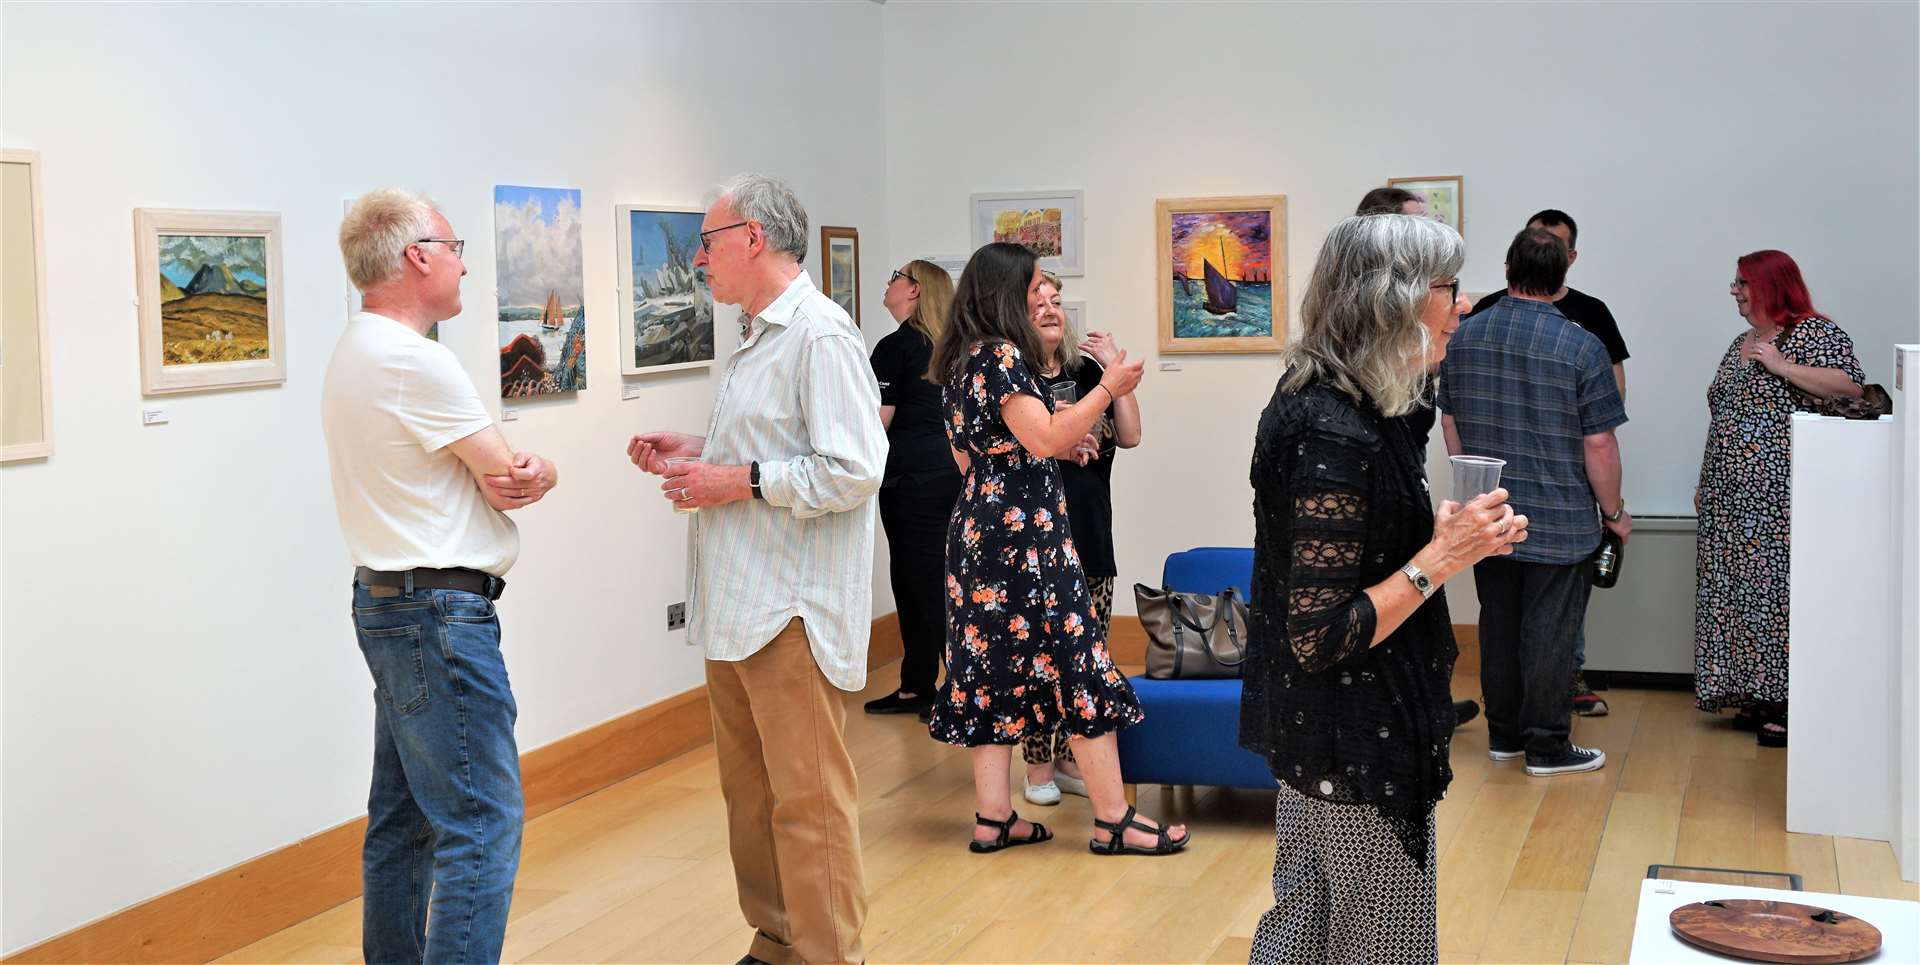 The Society of Caithness Artists has a show with the theme 'Change' on at the North Coast Visitor Centre in Thurso. Picture: DGS